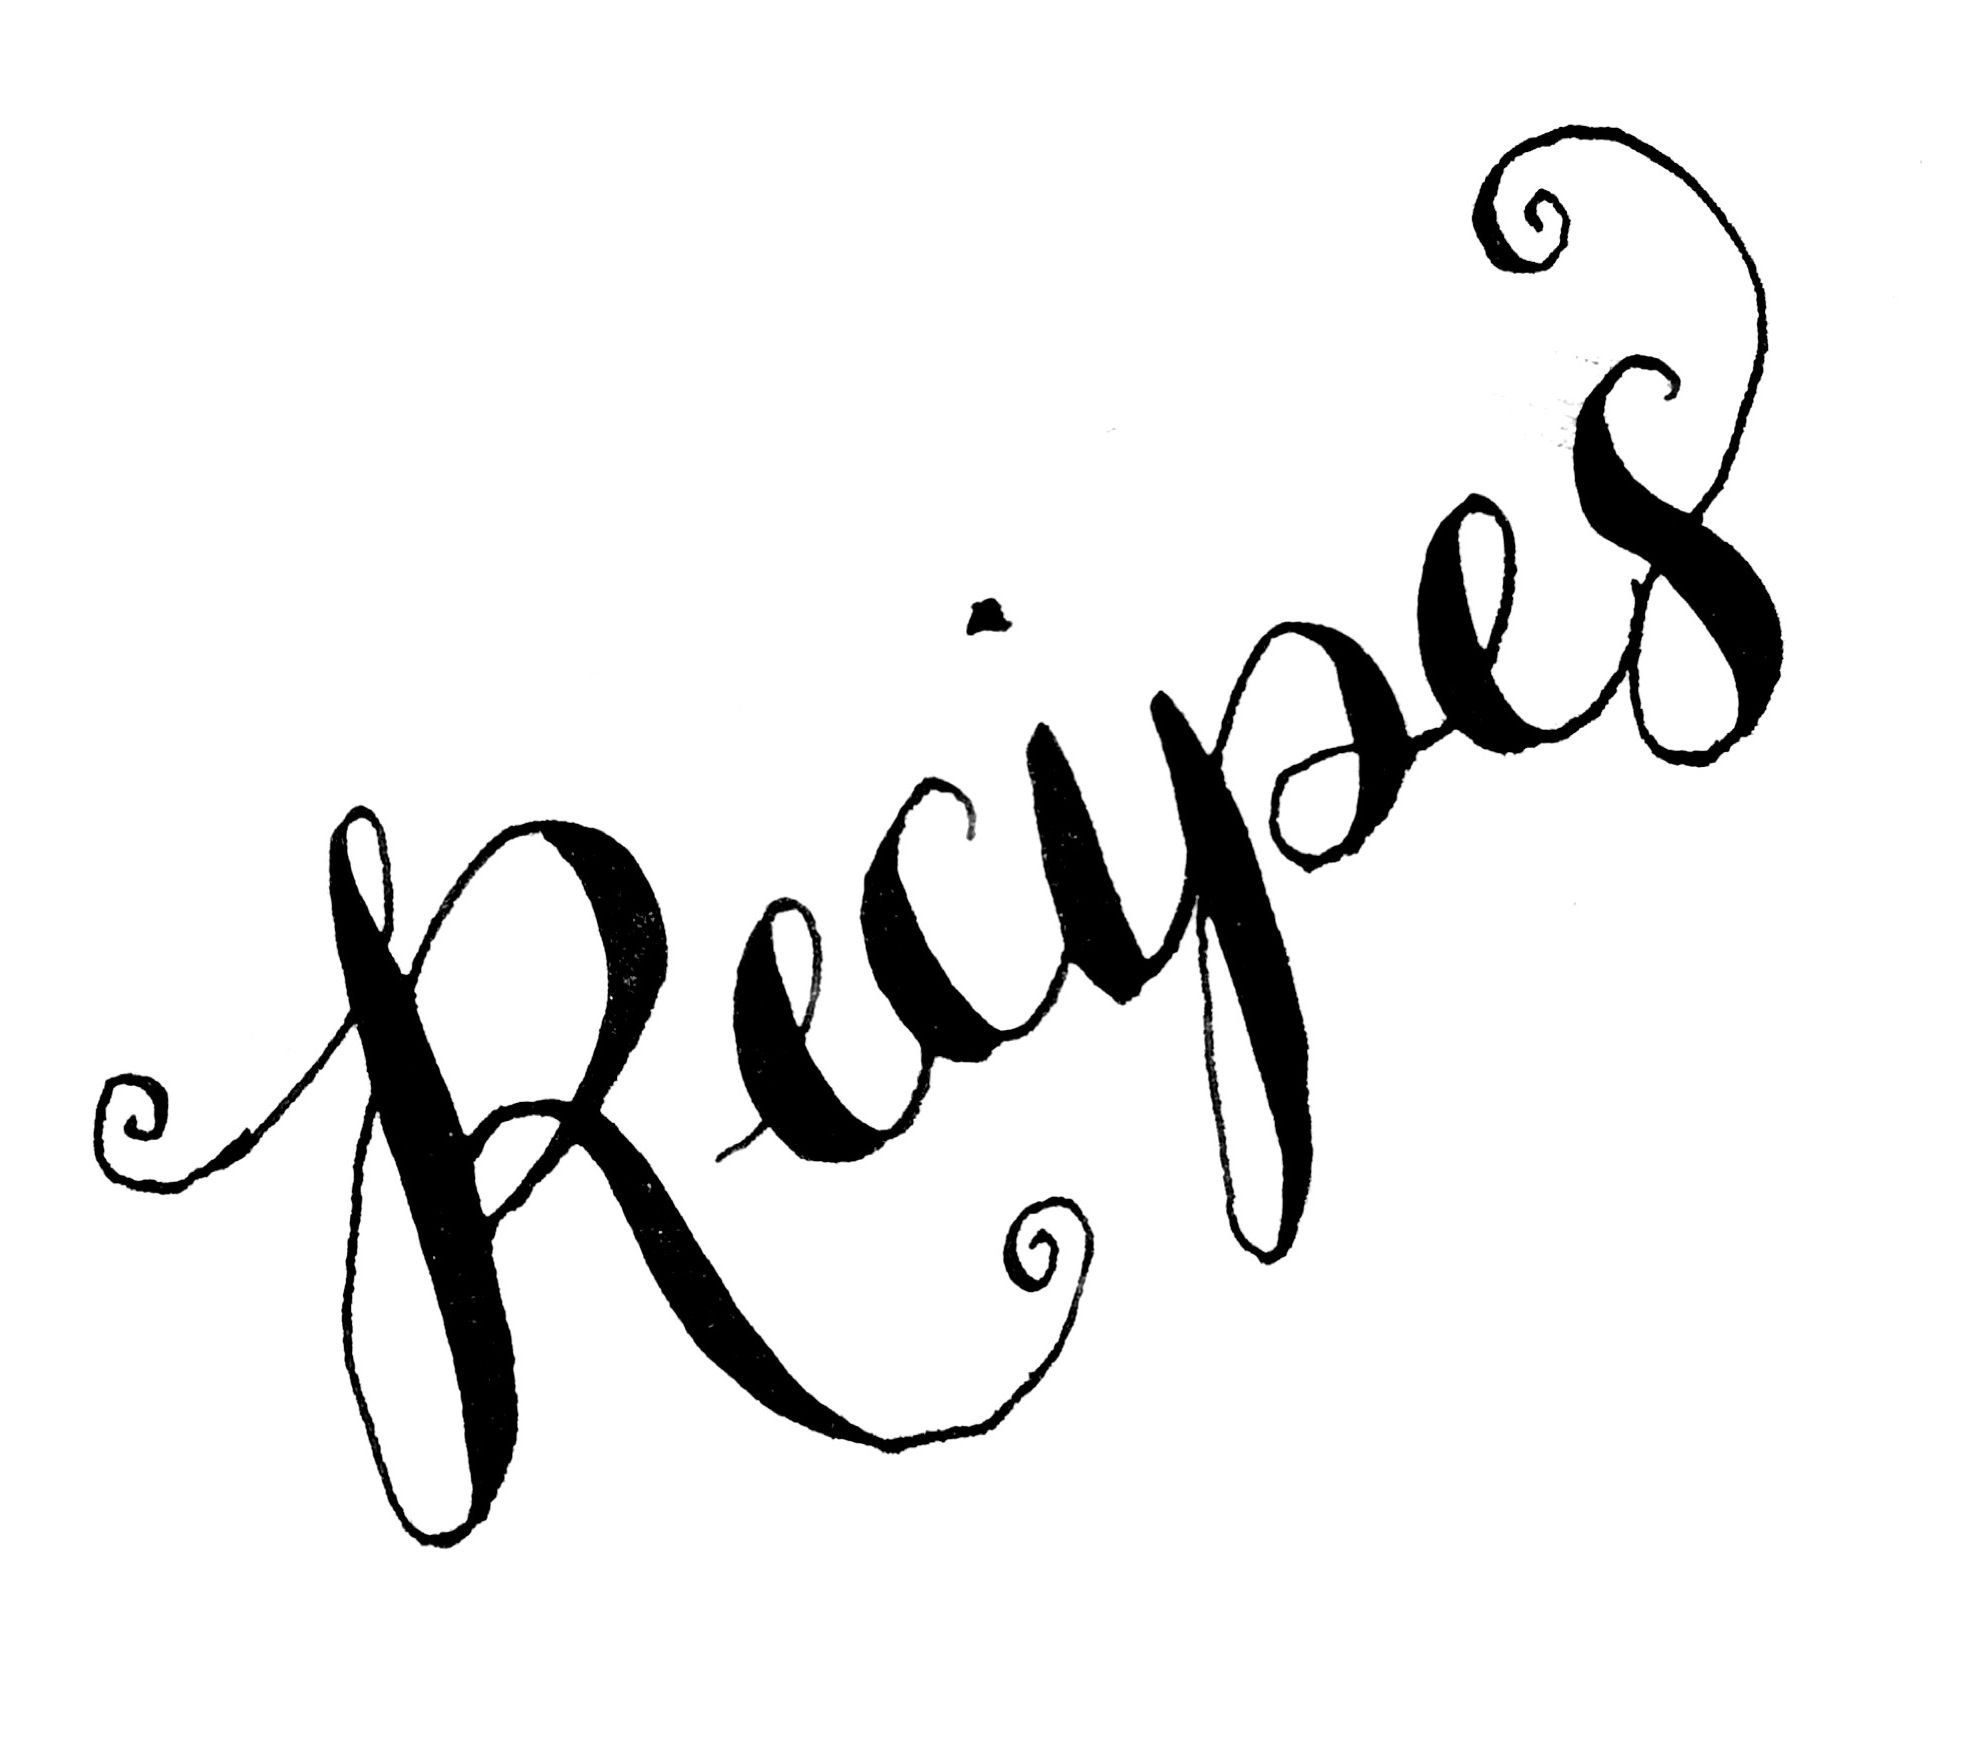 Recipes calligraphy by claire. Cookbook clipart recipe word